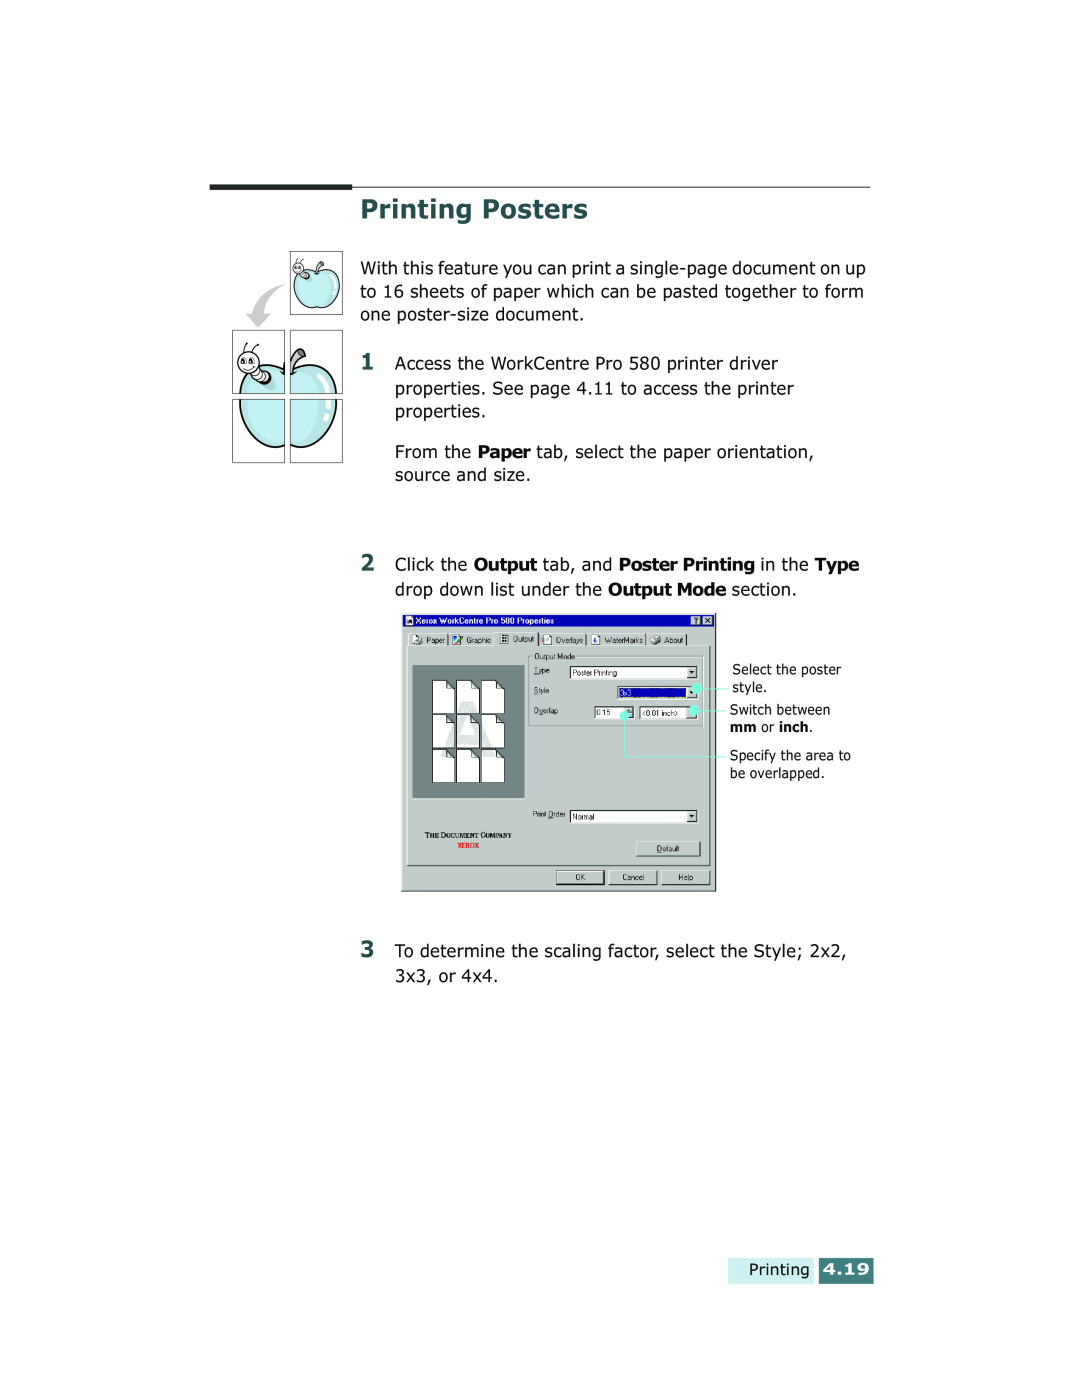 Xerox Pro 580 manual Printing Posters, Select the poster style 